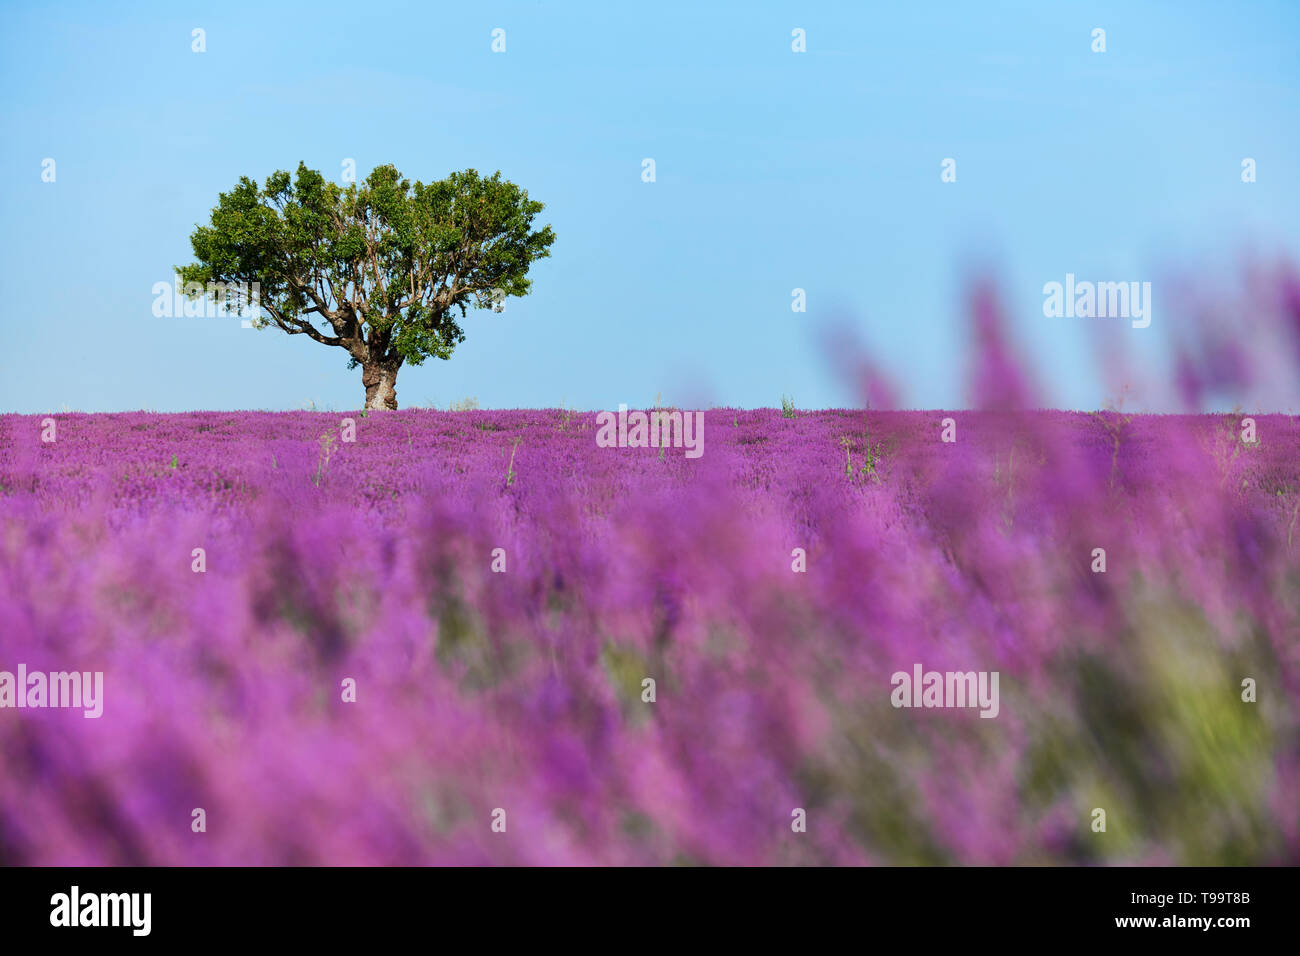 lonely tree in the middle of a field full of flowers of lavender Stock Photo